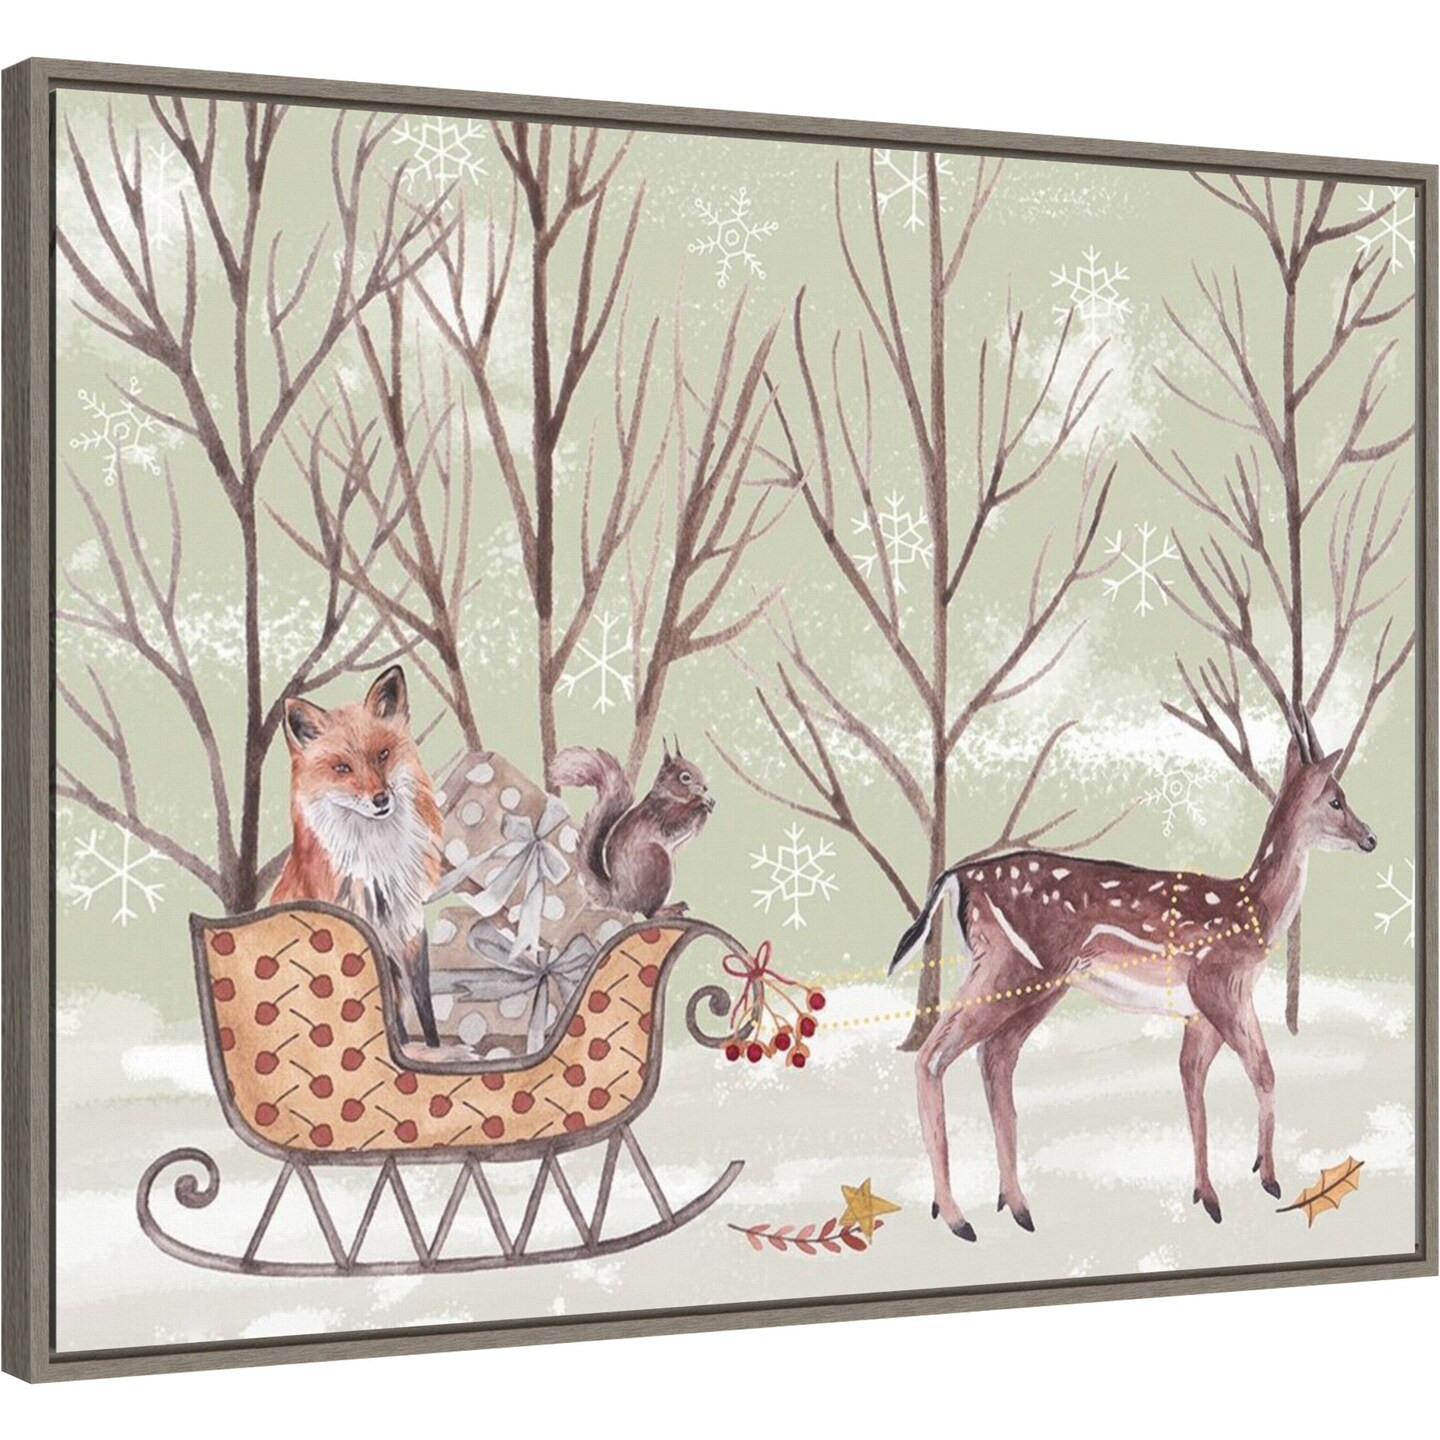 Christmas Time I by Melissa Wang 30-in. W x 23-in. H. Canvas Wall Art Print Framed in Grey